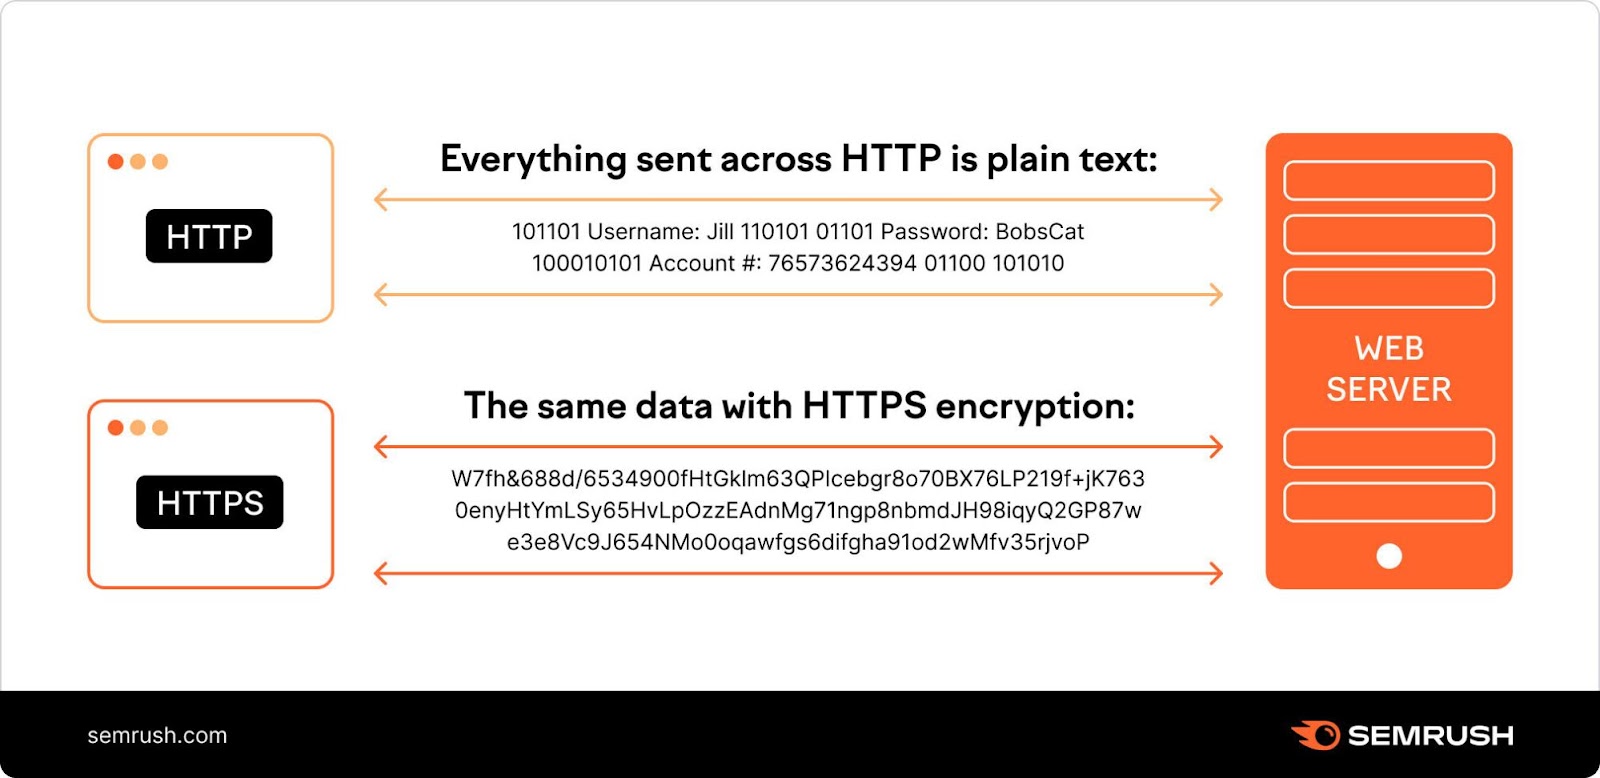 HTTP and HTTPS communication with the website's server explained